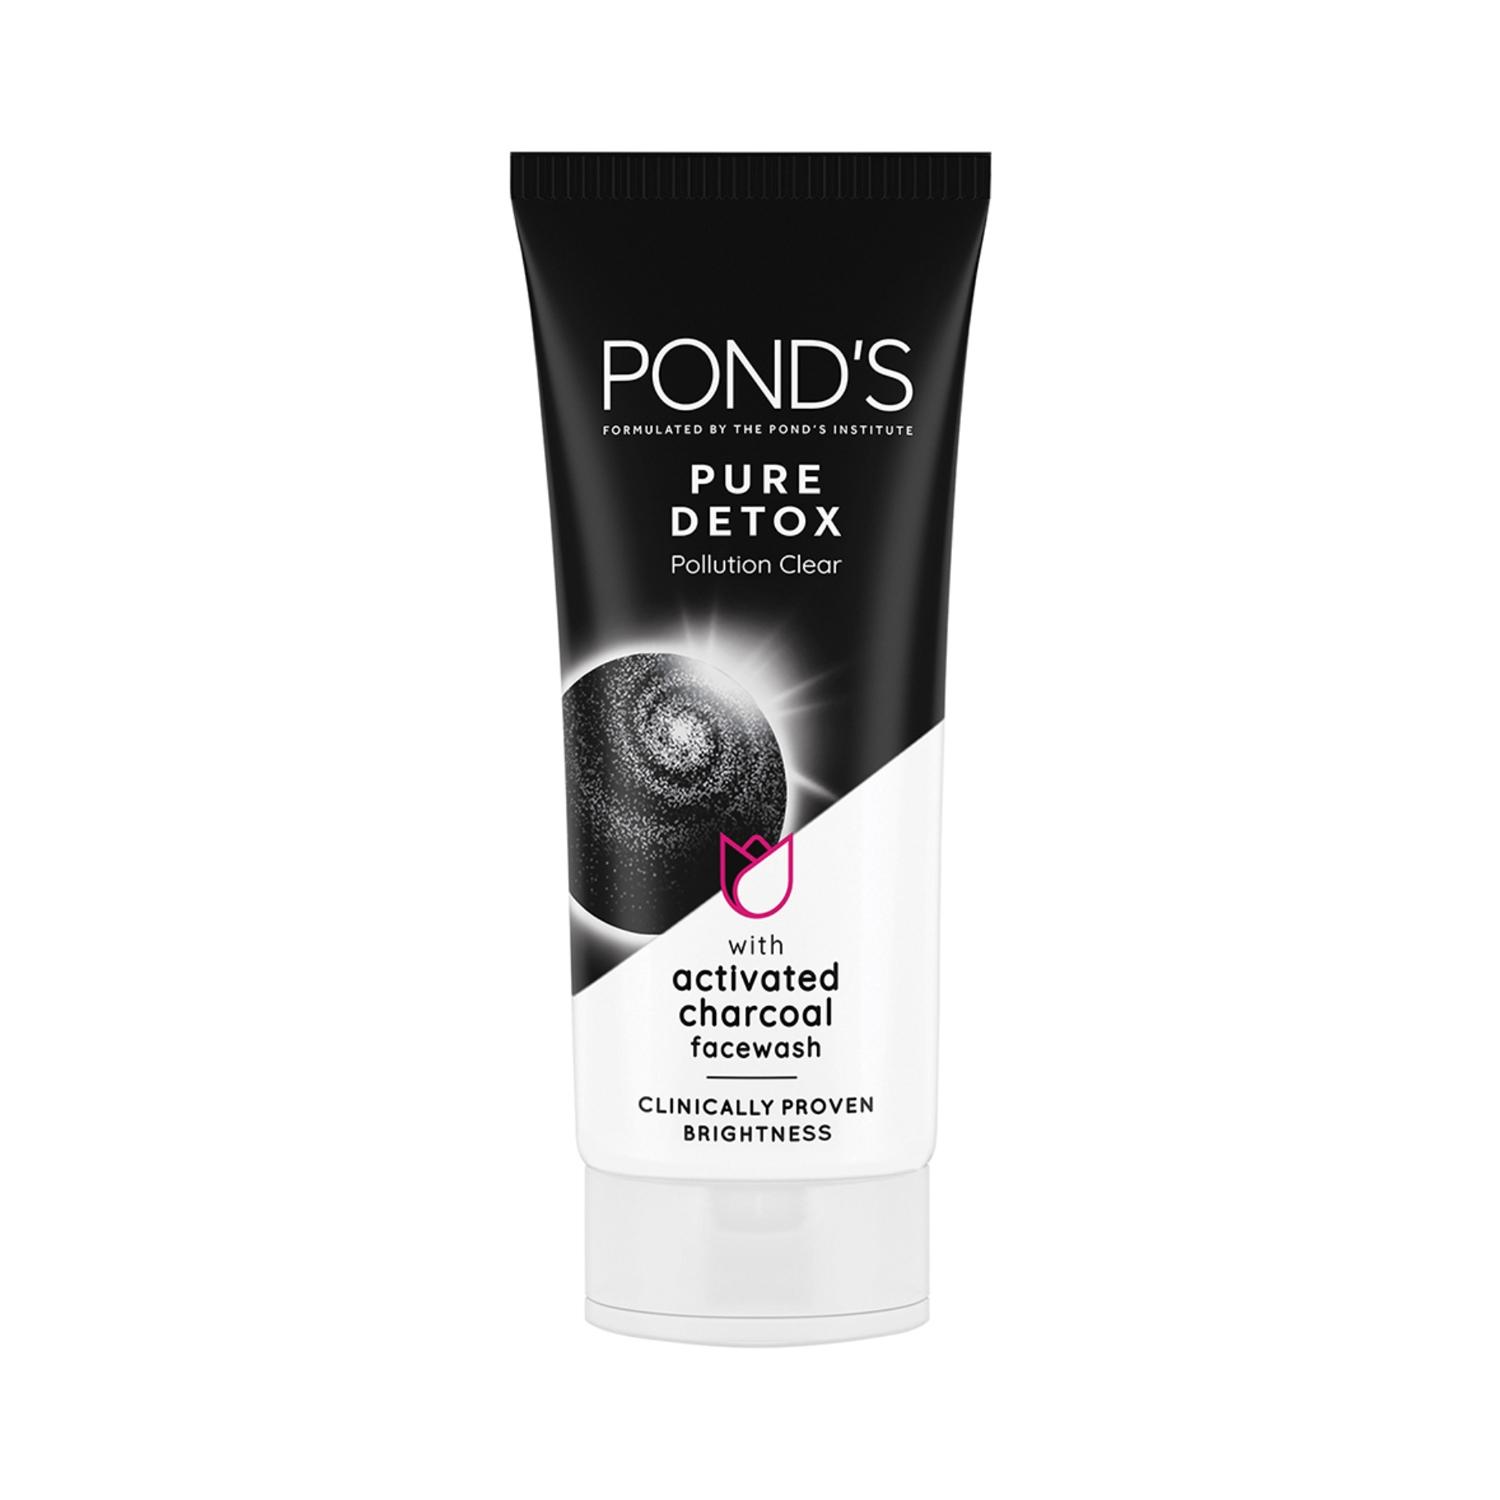 Pond's Pure Detox Anti-Pollution Purity Facewash With Activated Charcoal (100g)